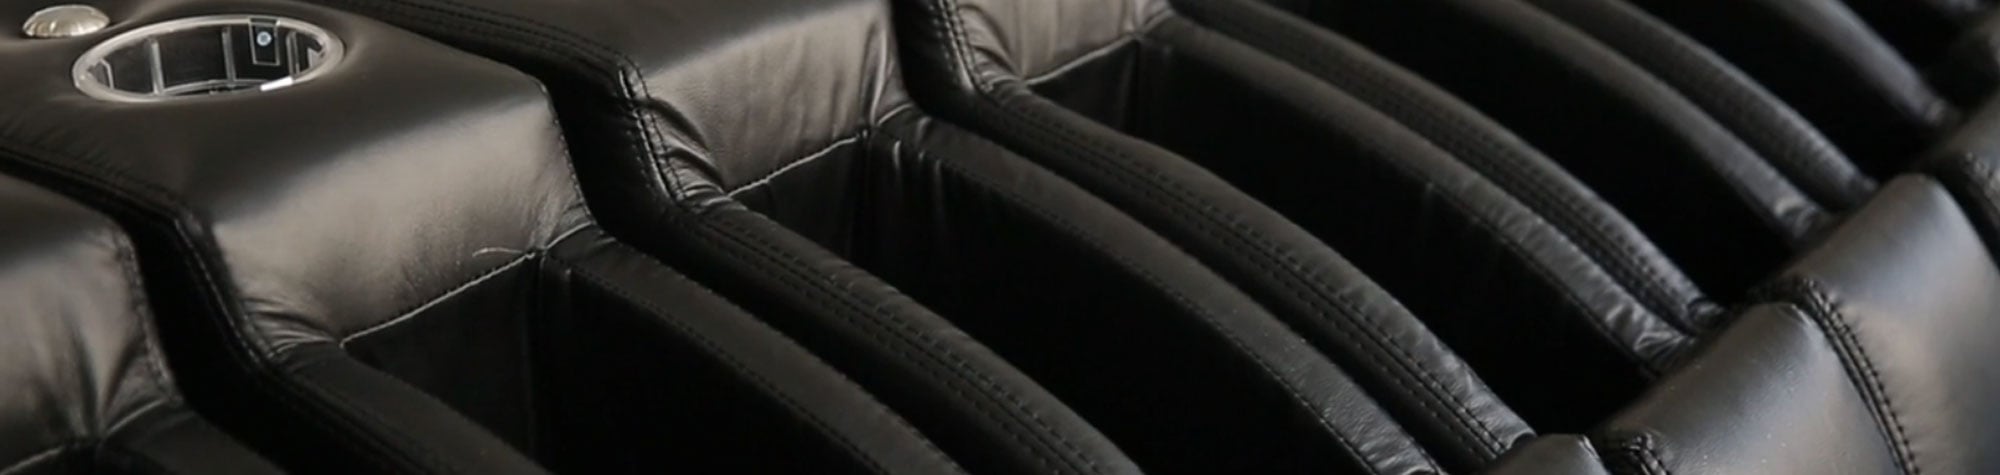 How Octane Seating Is Made – Video